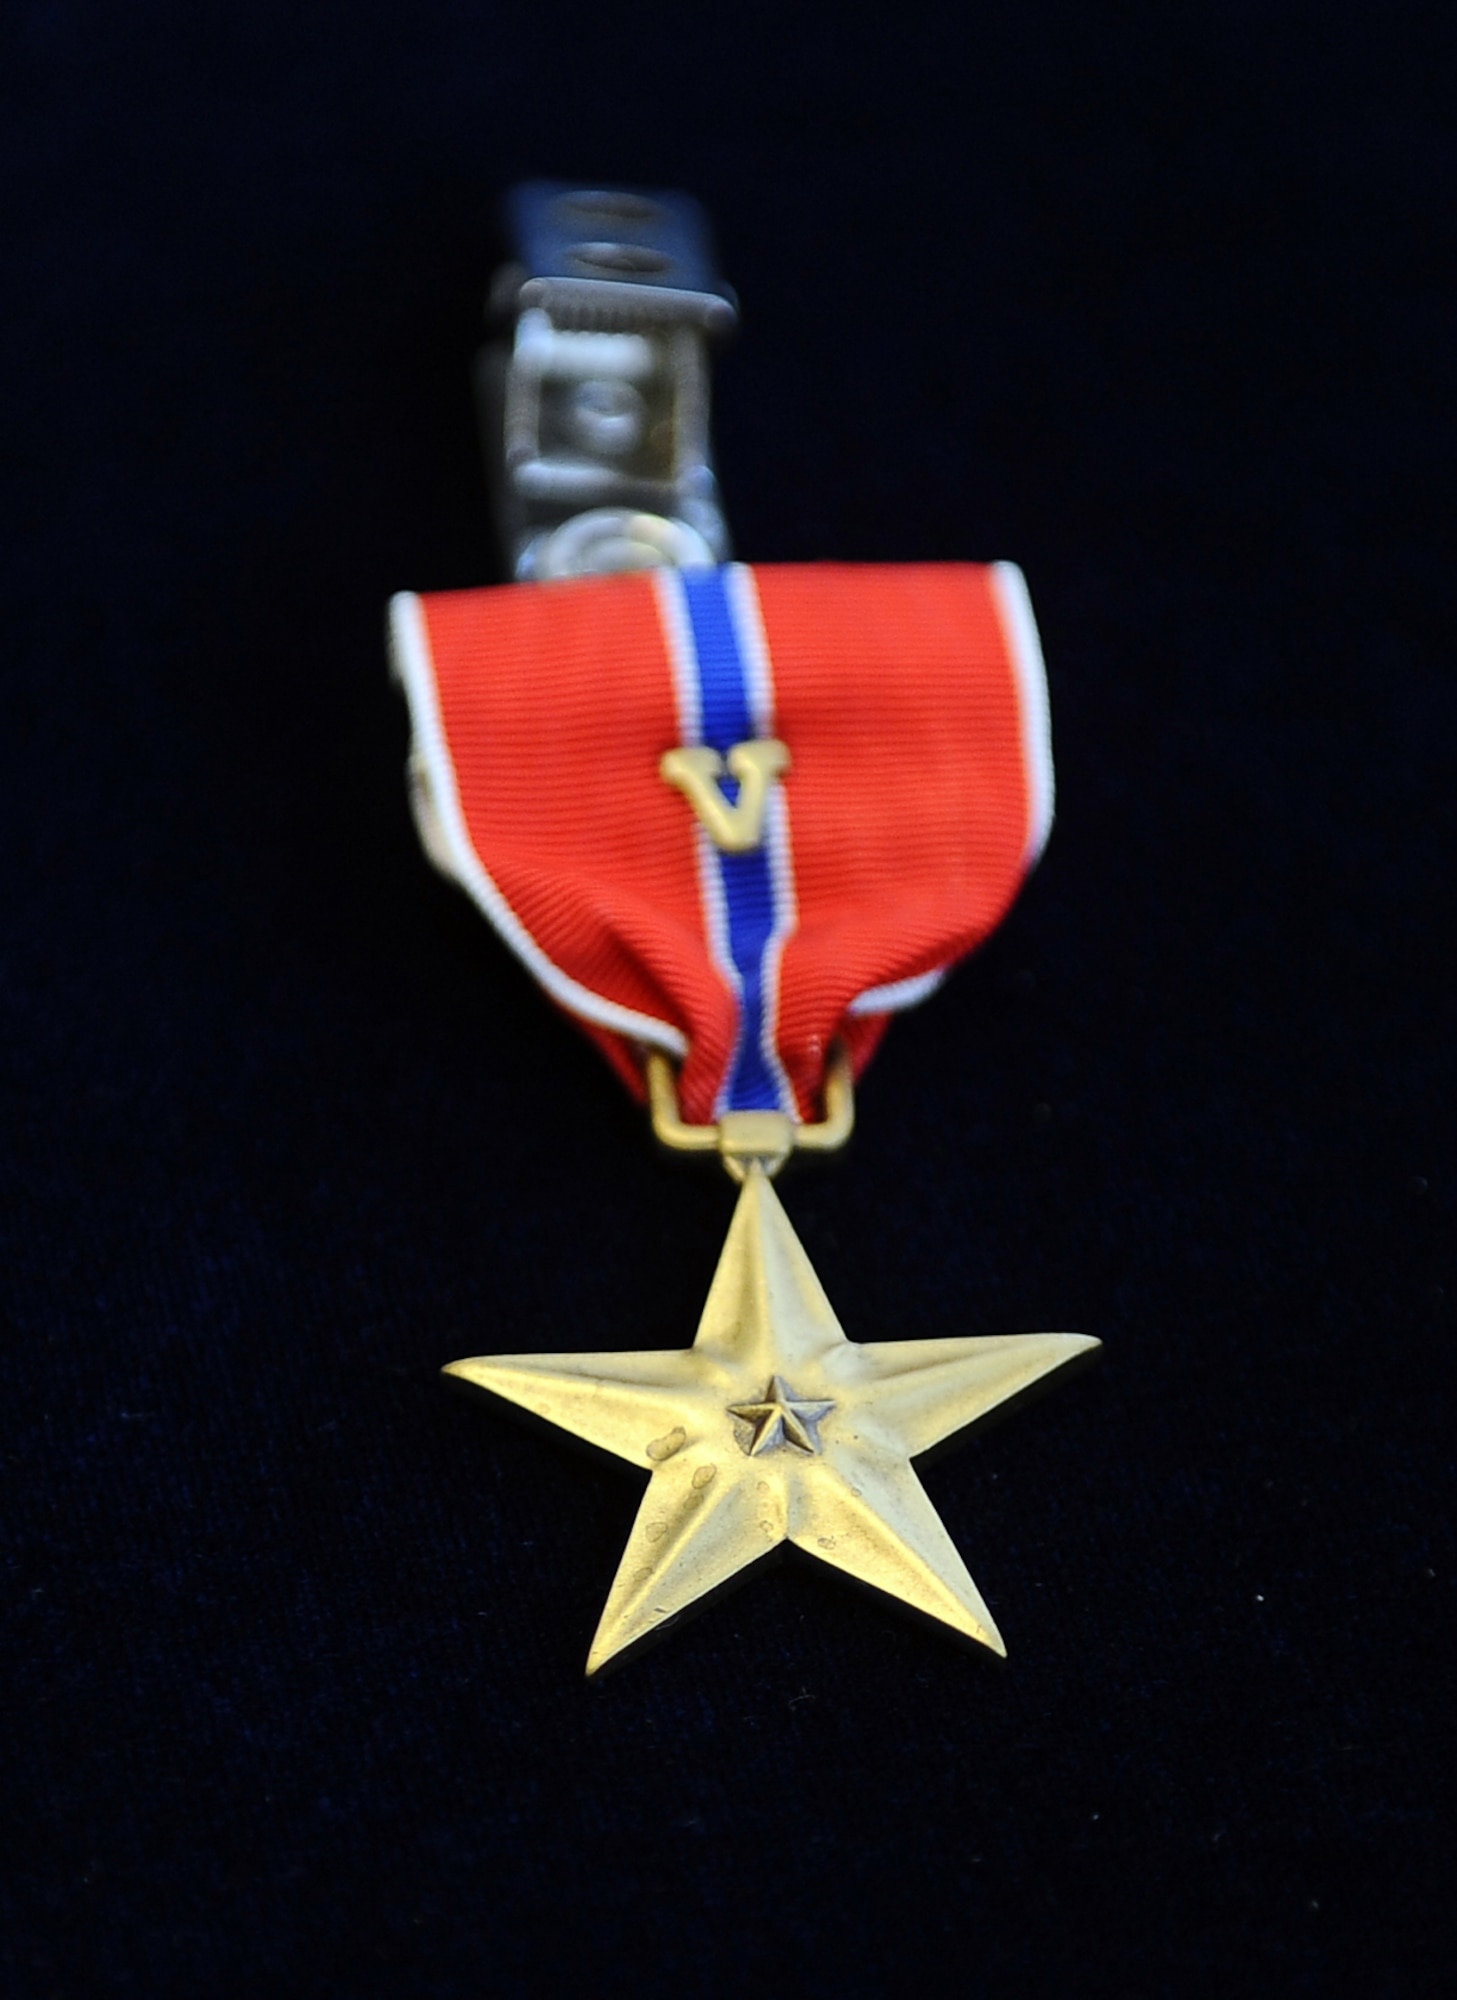 The Bronze Star medal is a U.S. armed forces military decoration that is awarded to an individual for bravery, acts of merit or meritorious service. The "V" device located on the ribbon indicates valor and is added to the medal to denote heroism. (U.S. Air Force photo by Josh Plueger/Released).